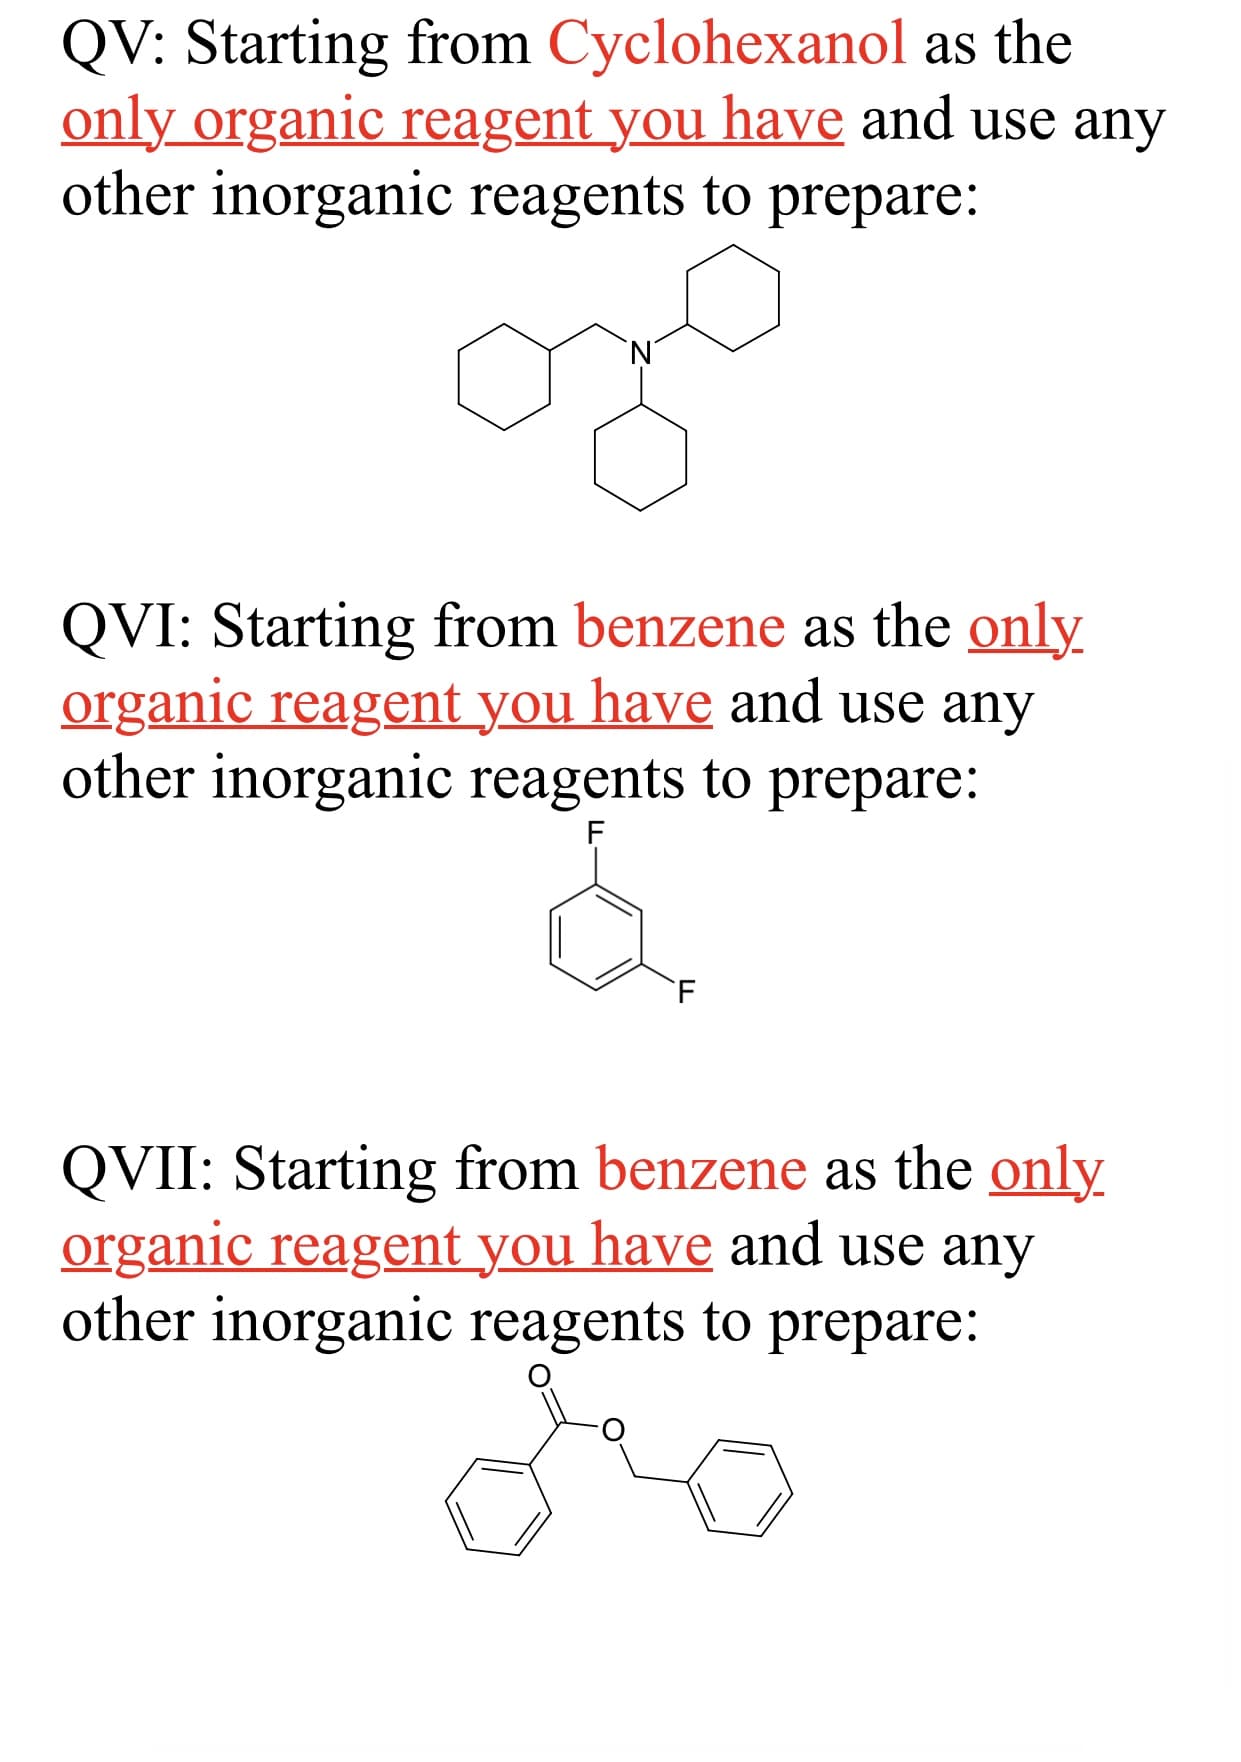 QV: Starting from Cyclohexanol as the
only organic reagent you have and use any
other inorganic reagents to prepare:
'N'
QVI: Starting from benzene as the only
organic reagent you have and use any
other inorganic reagents to prepare:
F.
QVII: Starting from benzene as the only
organic reagent you have and use any
other inorganic reagents to prepare:
